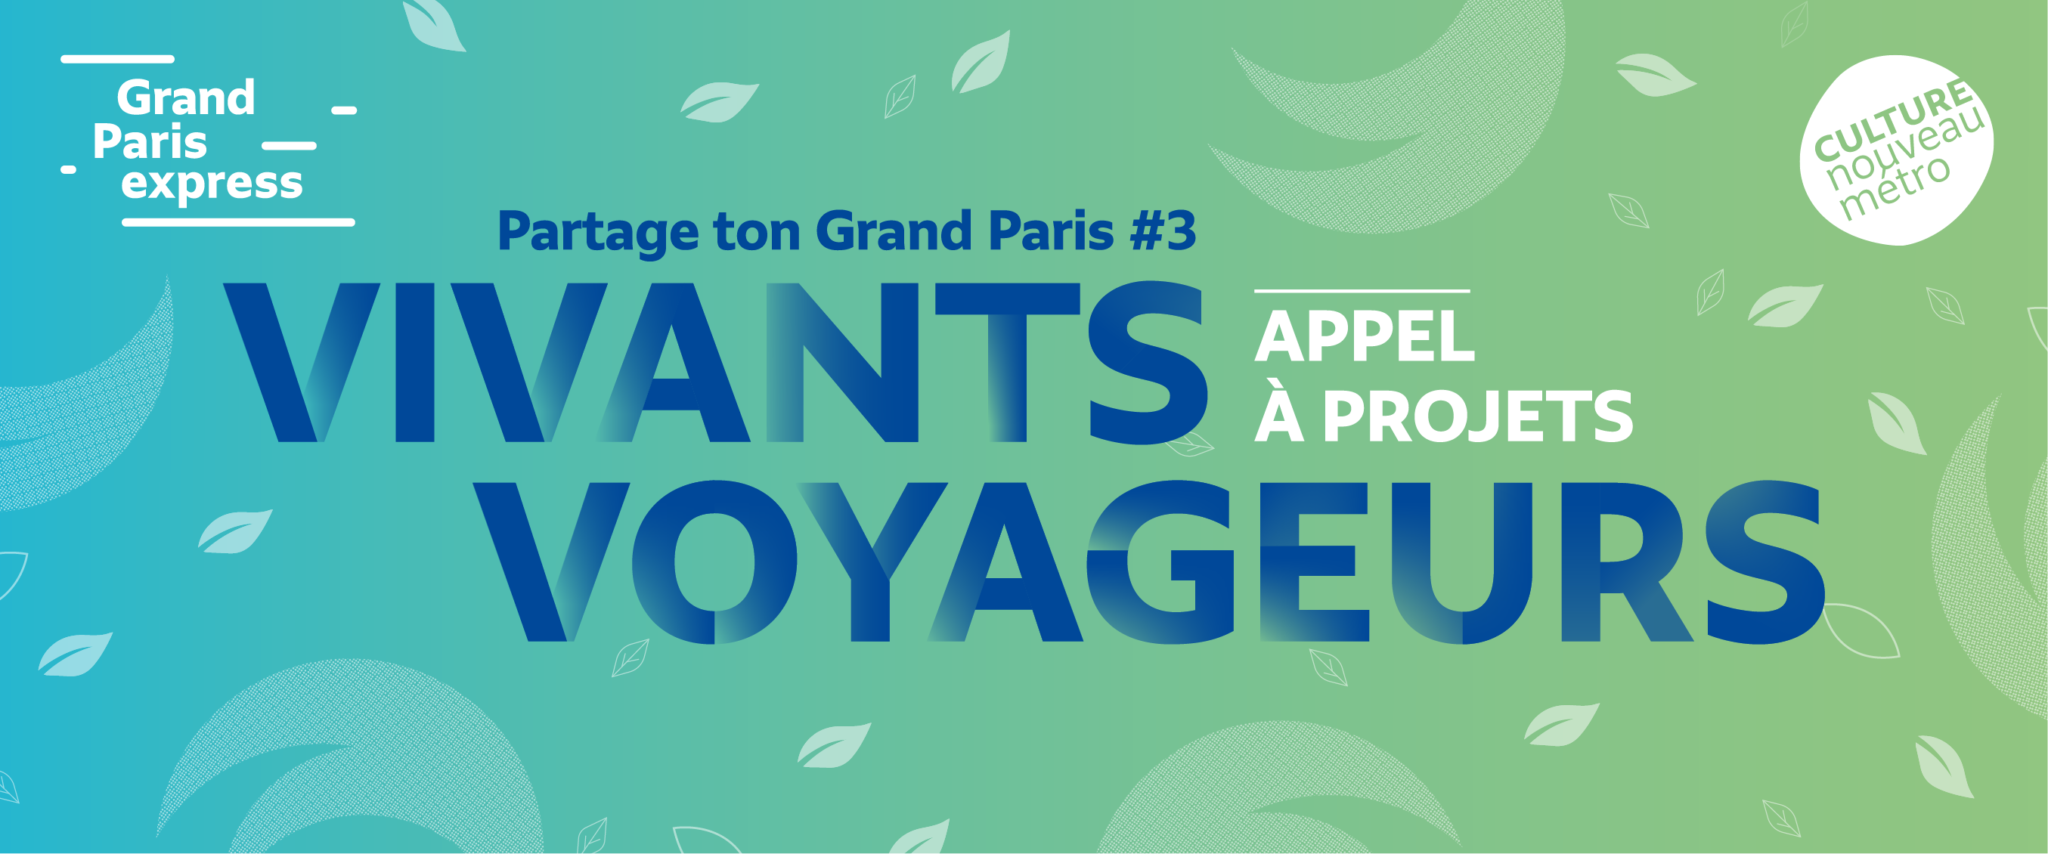 Call for projects: Vivants Voyageurs